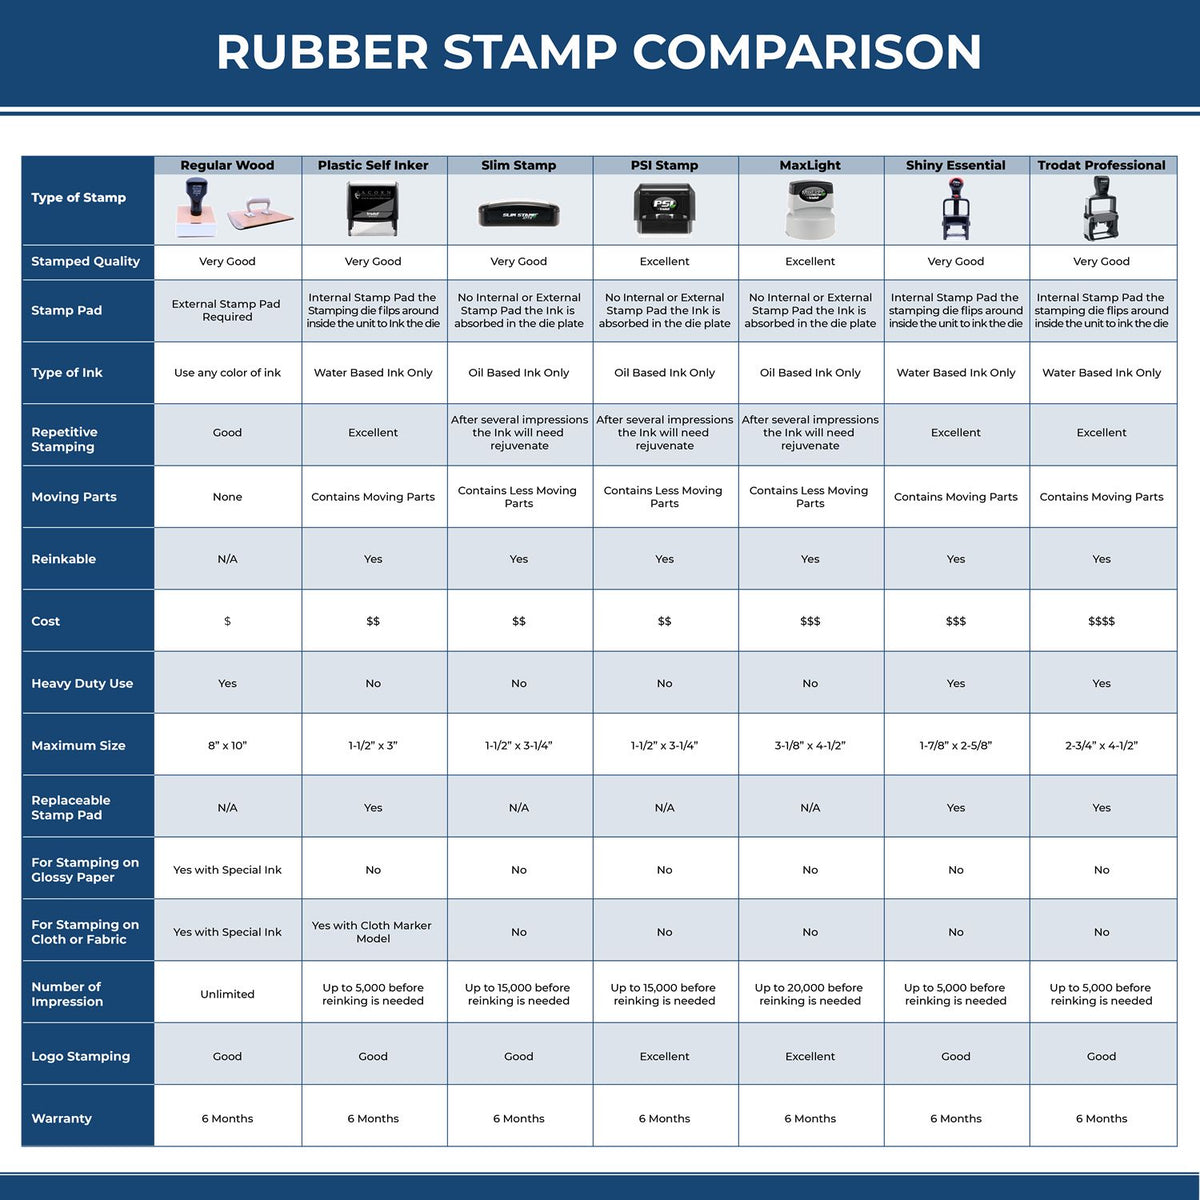 Large Self-Inking Narrow Font Court Copy Stamp 4896S Rubber Stamp Comparison